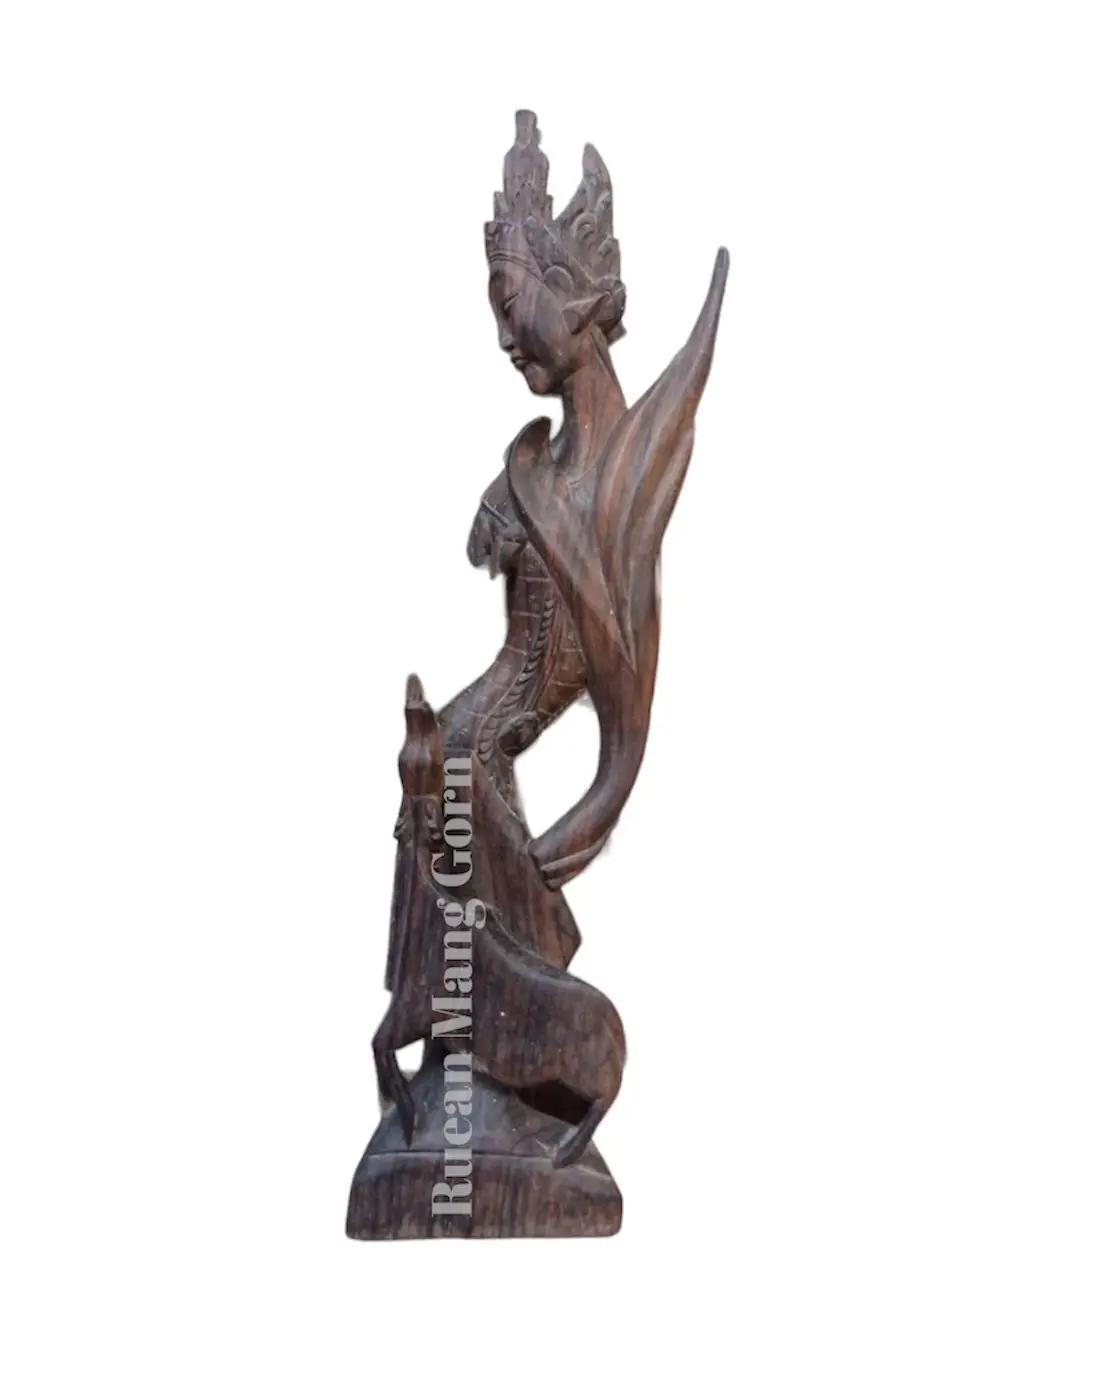 Vintage Black Ebony Wood Deity Hand Carved Sculpture Decoration Craft Luxury Style Product Classic Hand Made Premium Quality